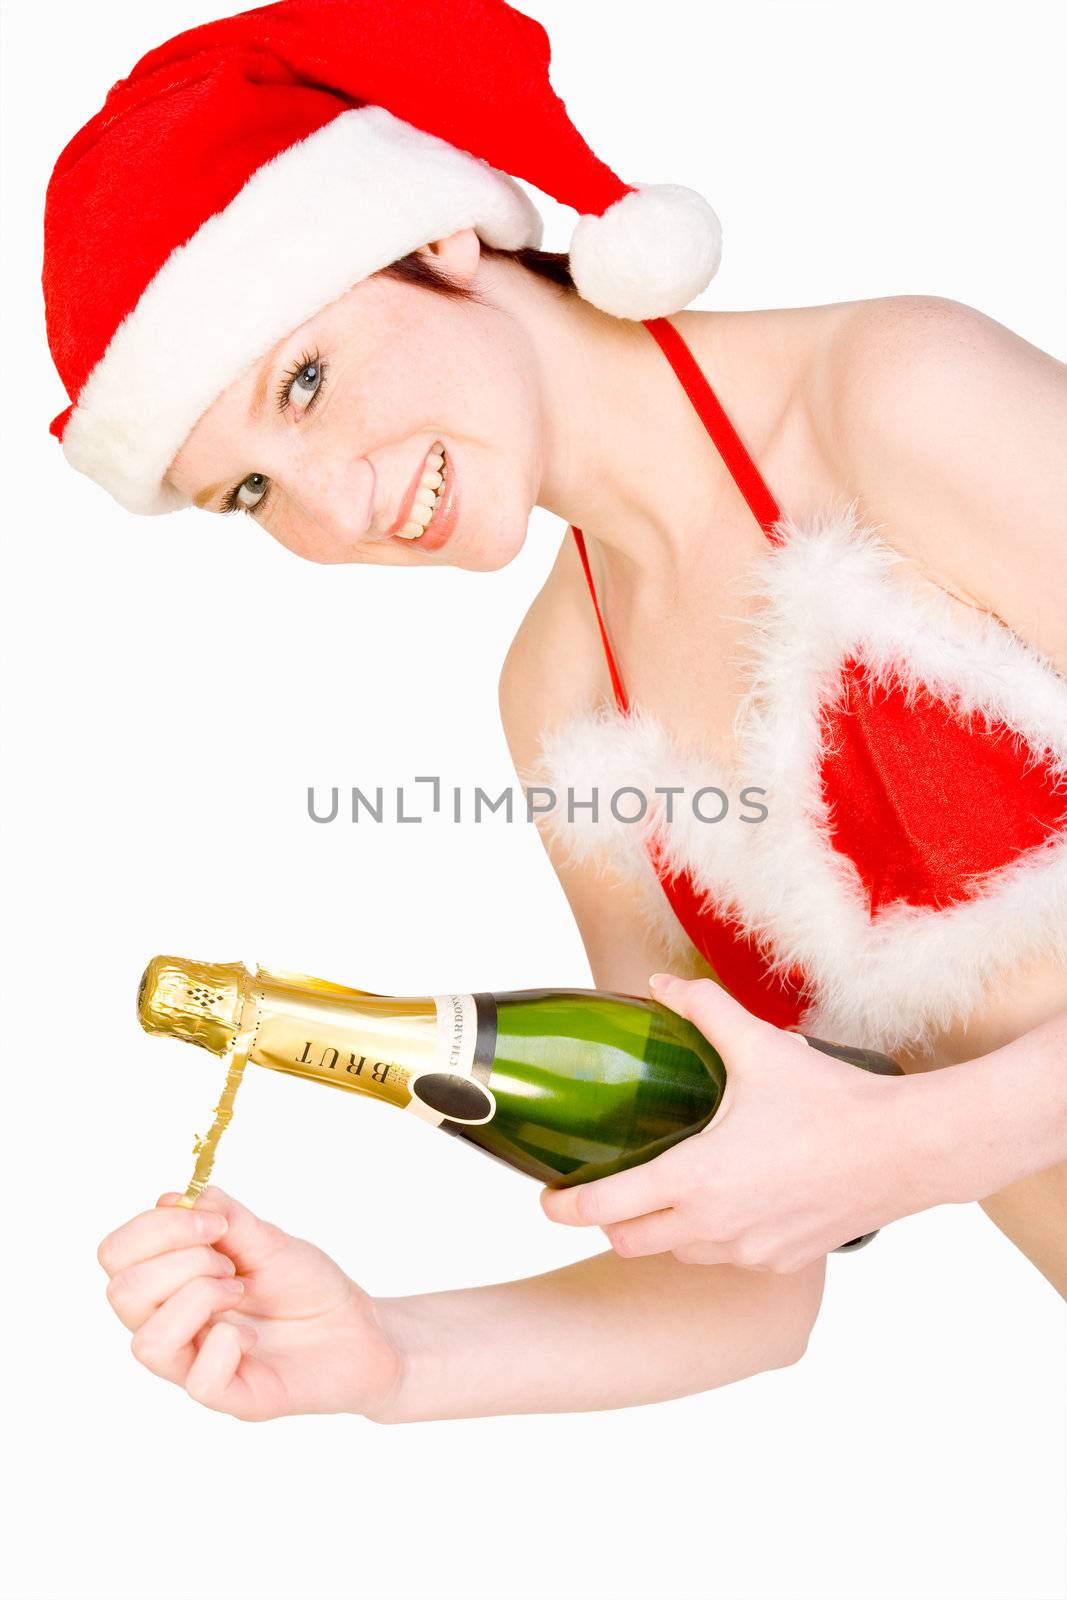 Beautifull girl in christmas bikini and with christmas hat is presenting a bottle of champagne. With background clipping path for your convenience